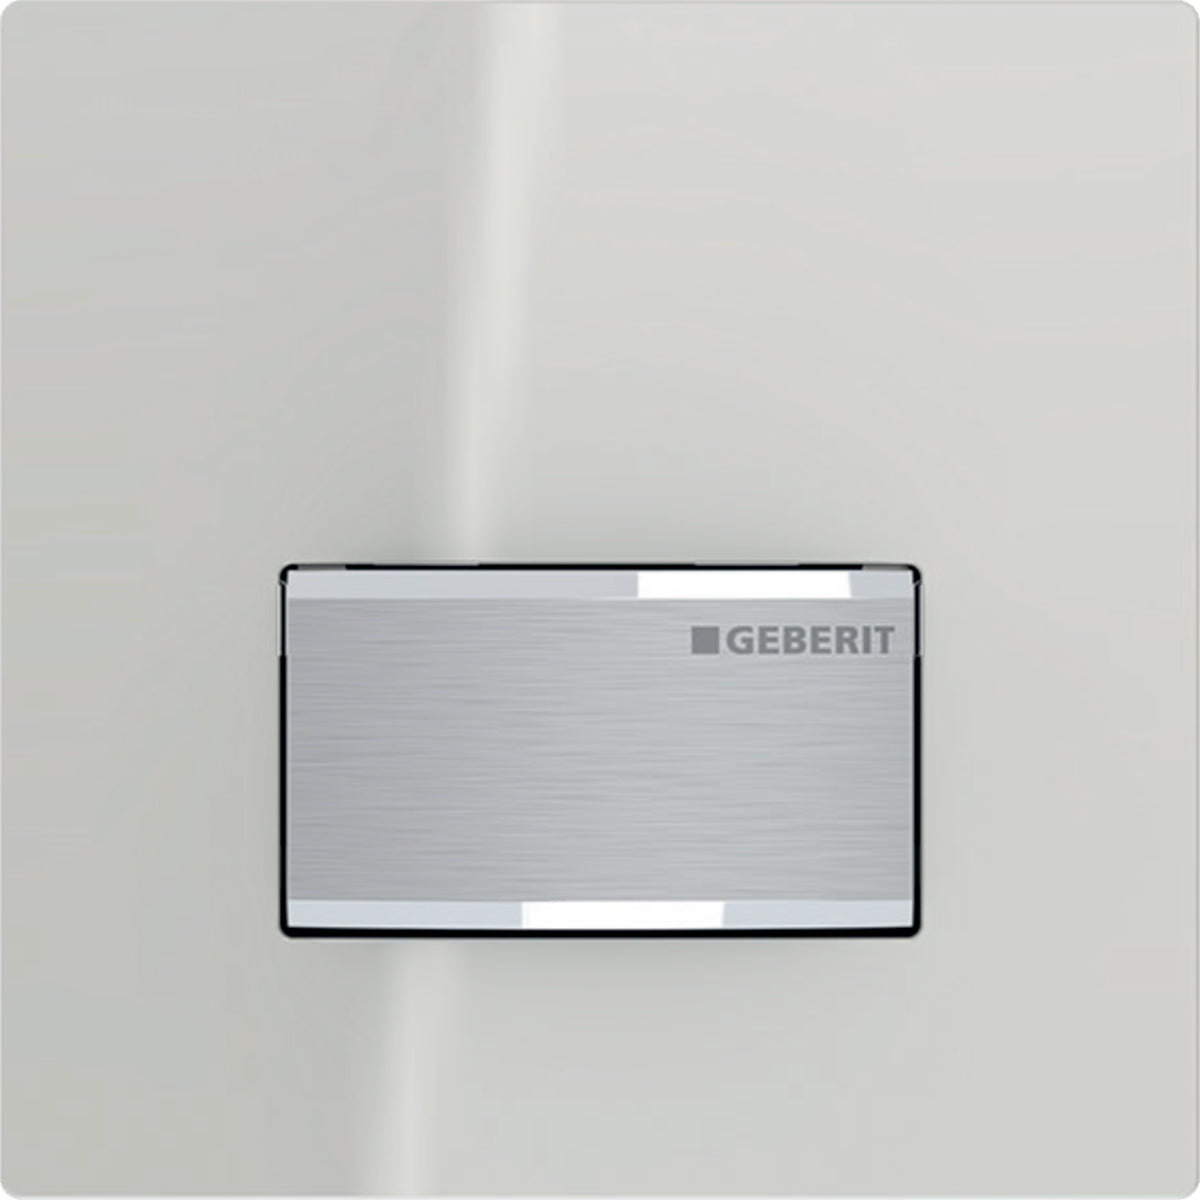 Geberit Urinal Flush Control with Pneumatic Flush Actuation and Type 50 Actuator Plate